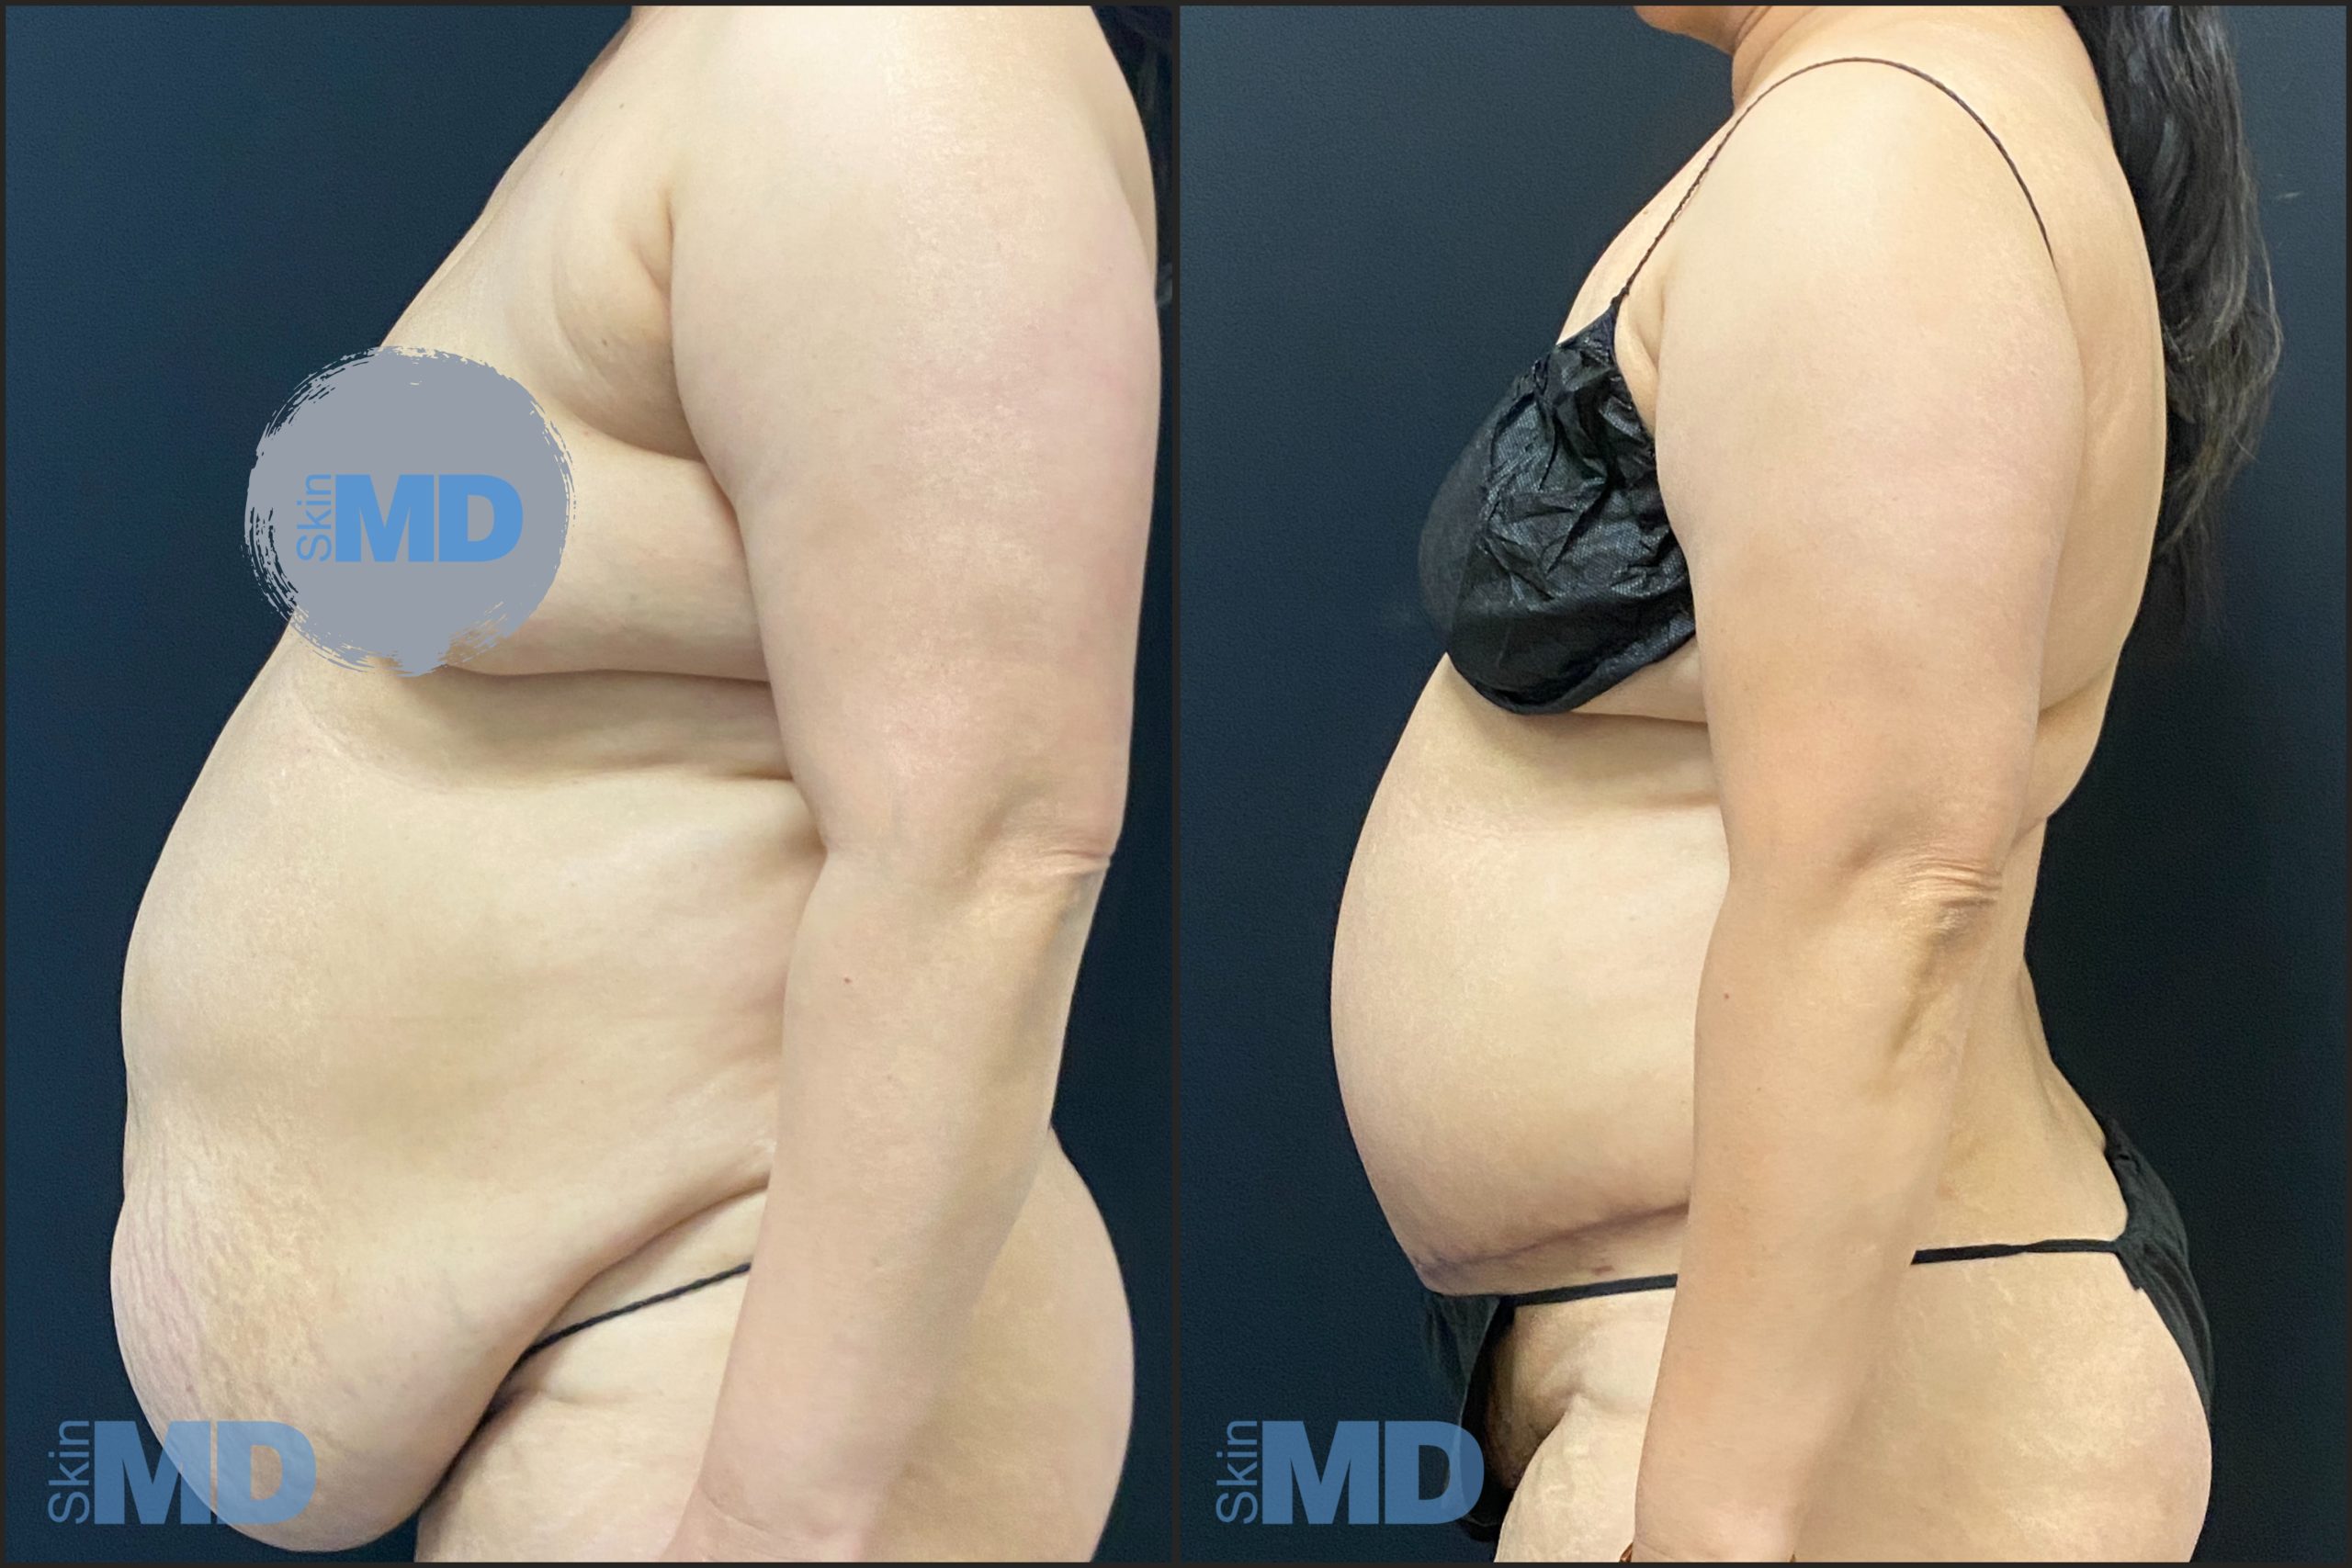 Before and after Tummy Tuck results